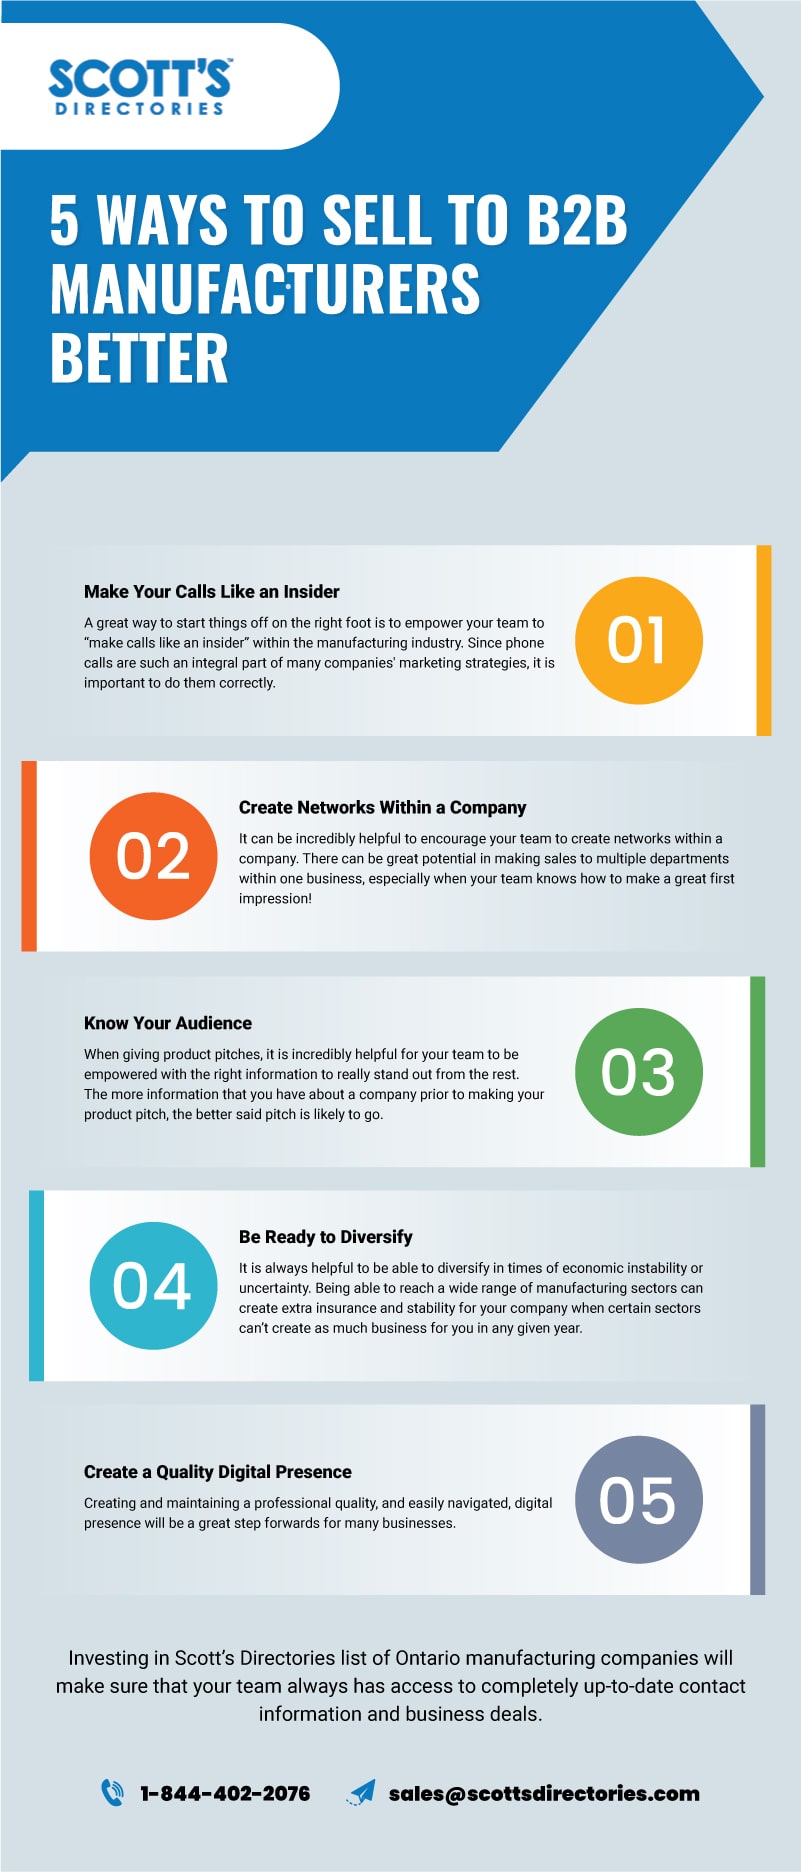 5 Ways to Sell to B2B Manufacturers Better - Infographic image